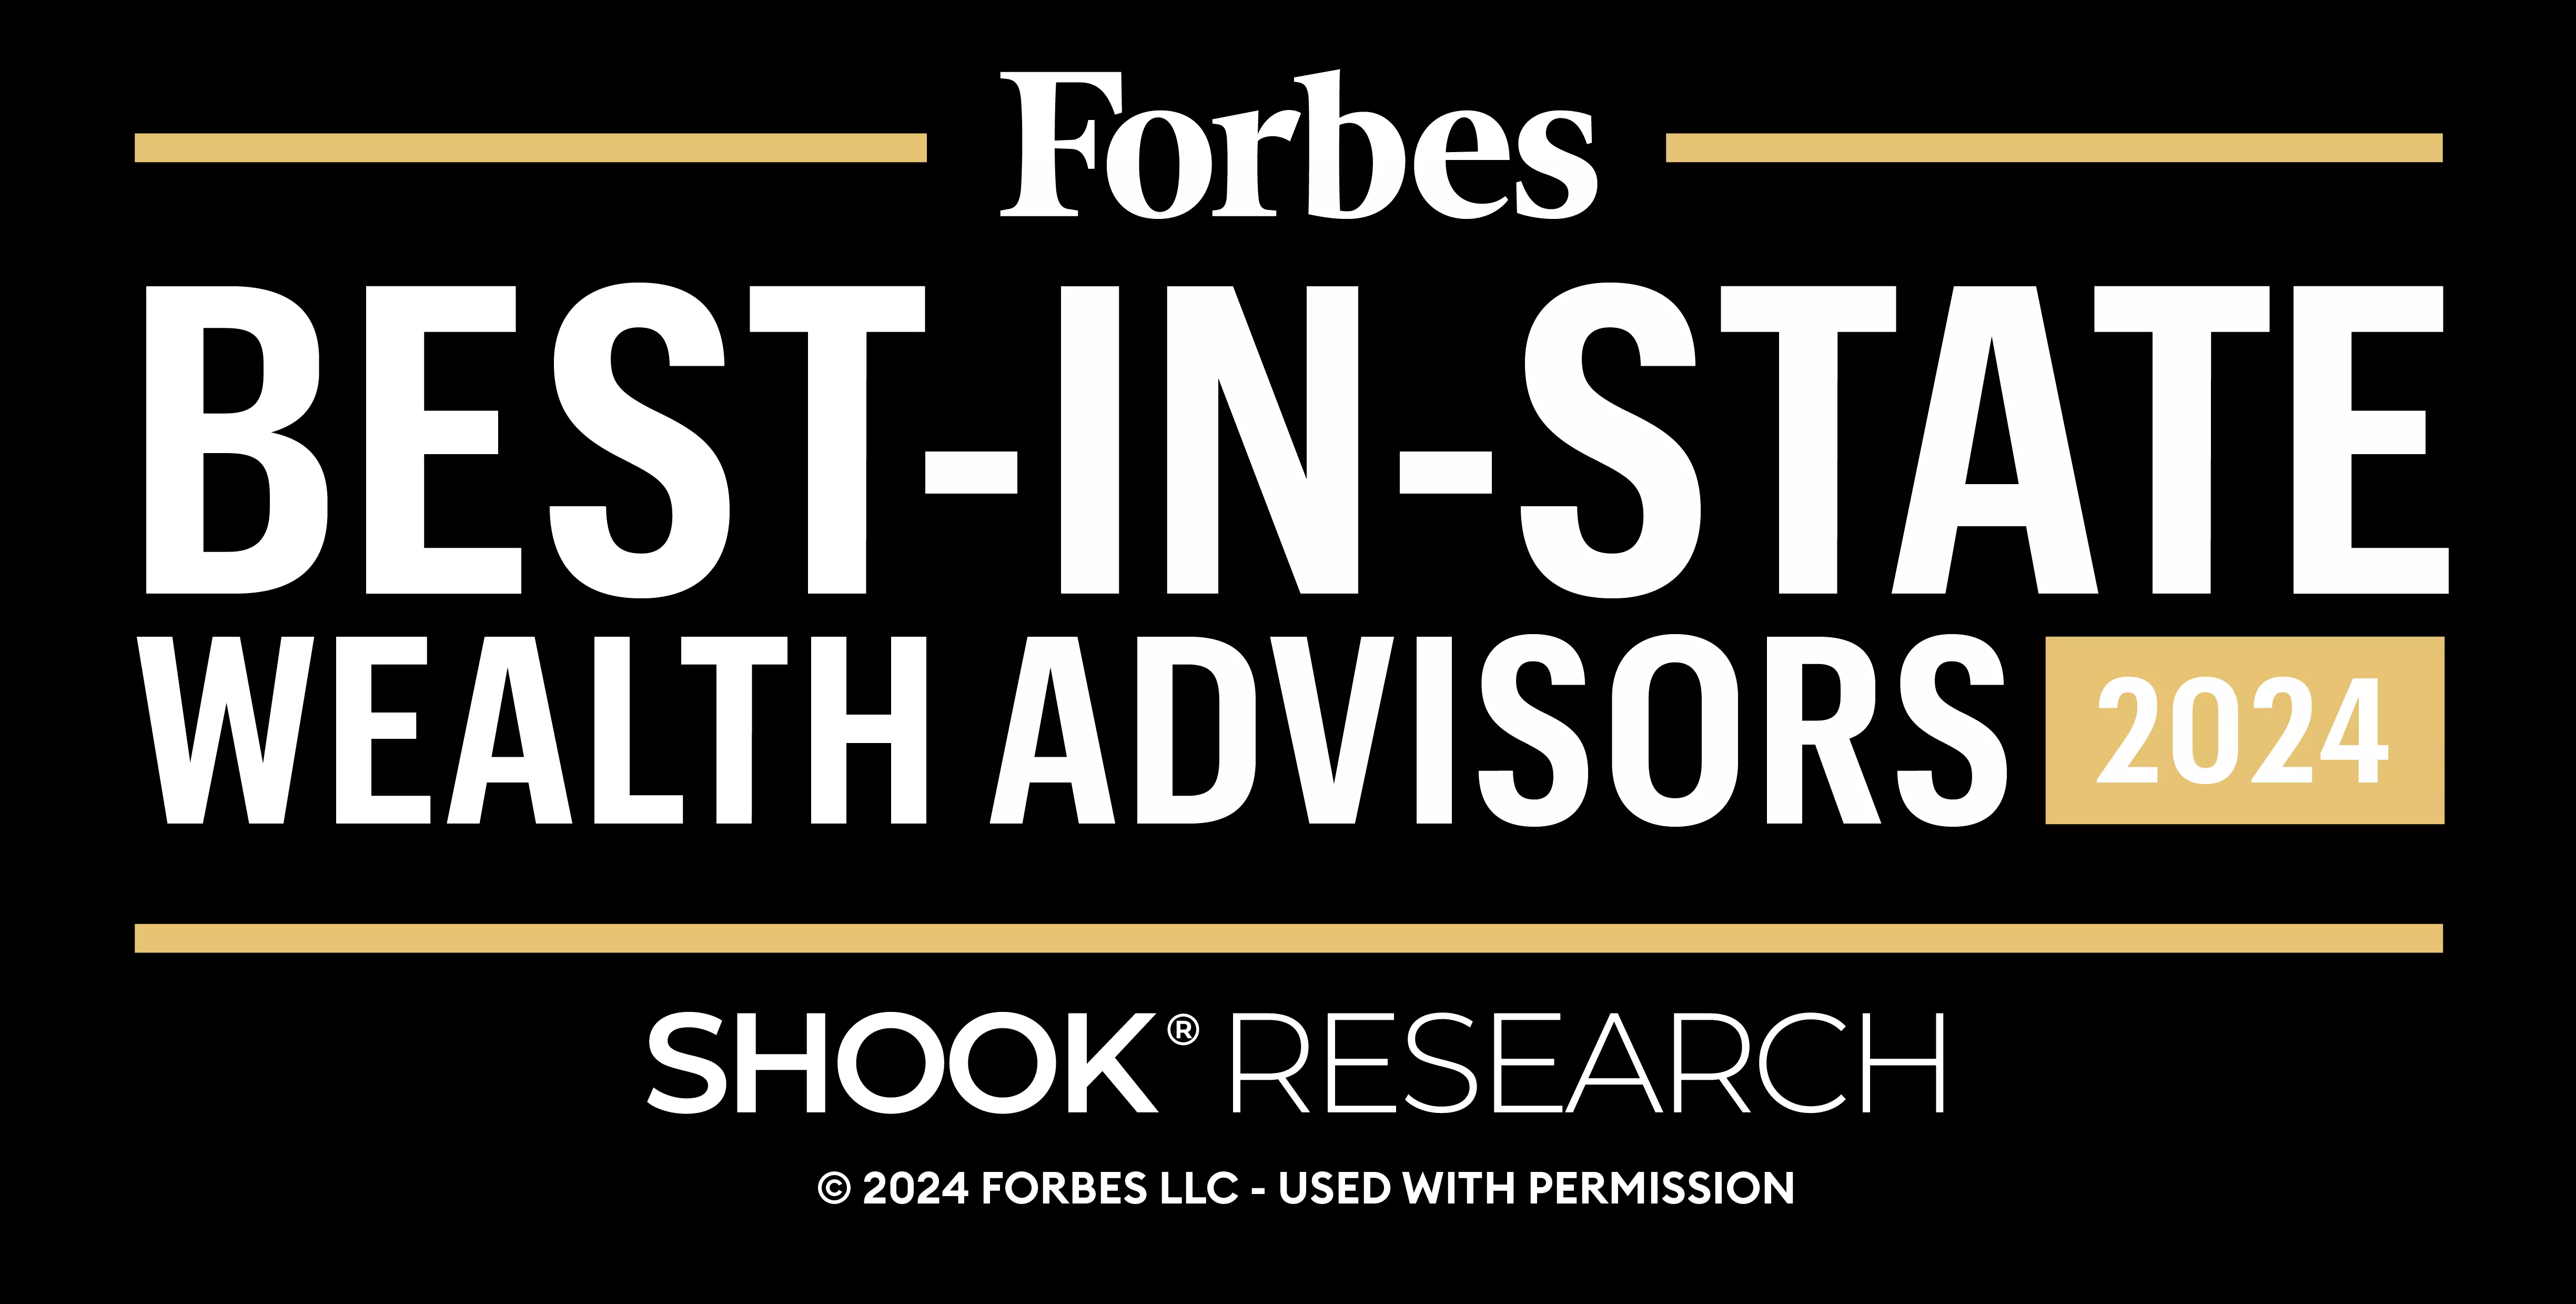 Forbes best in state wealth advisors 2024 logo